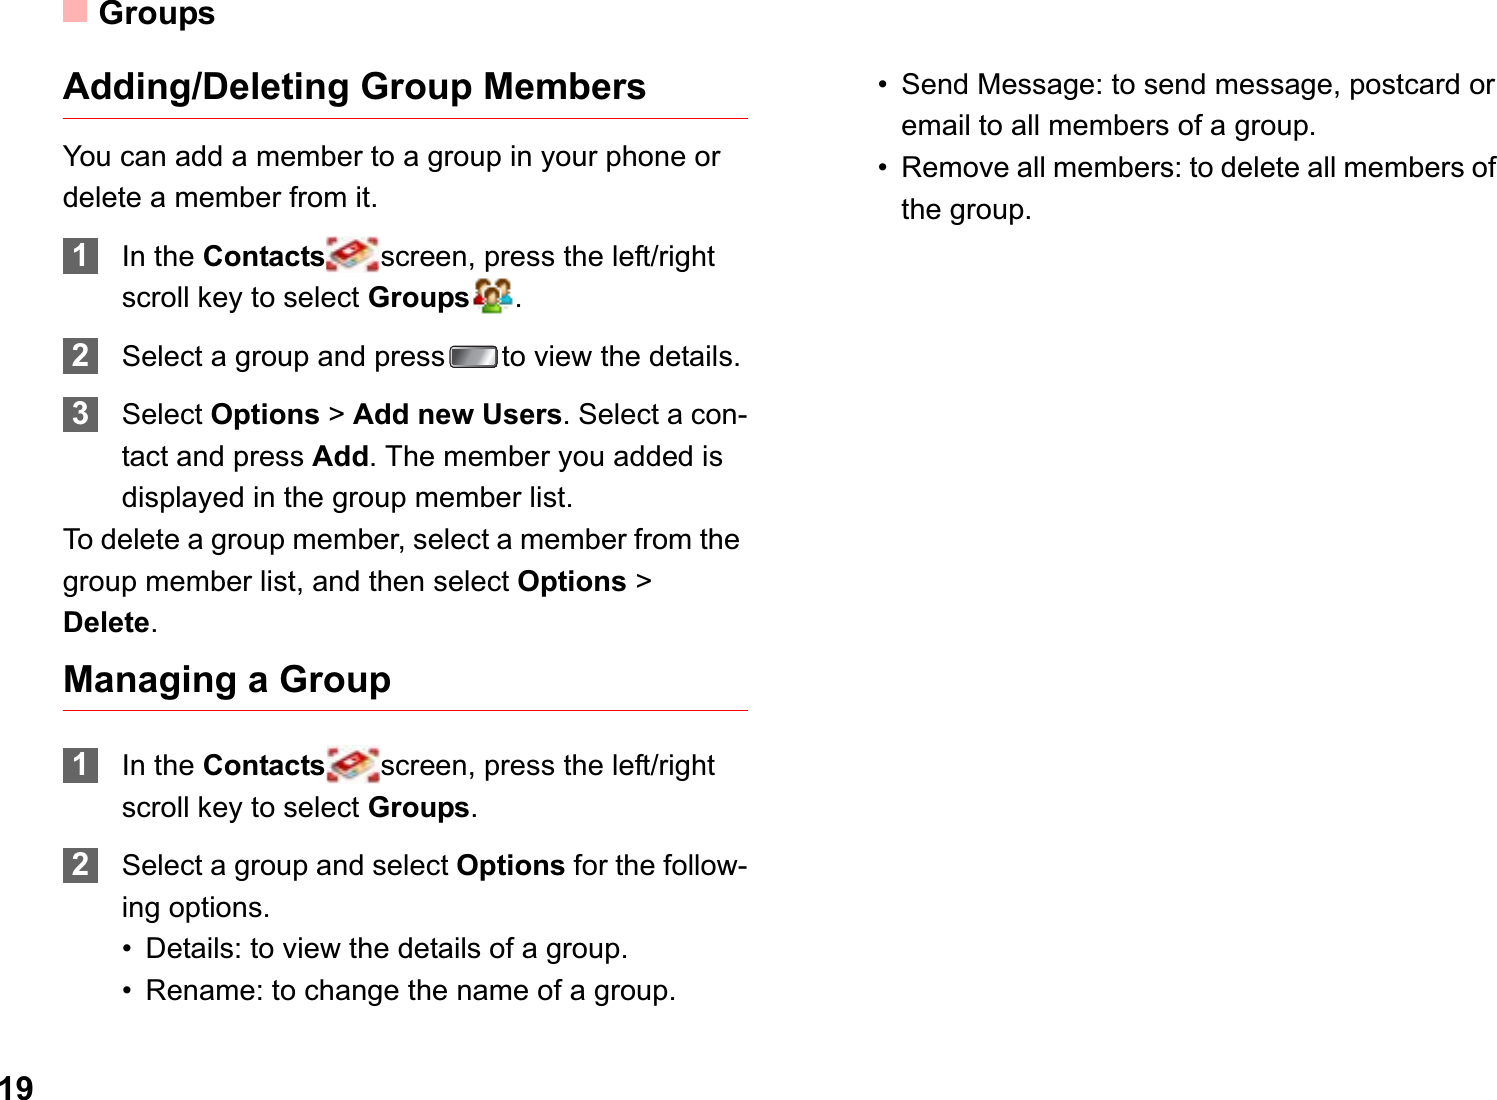 Groups19Adding/Deleting Group MembersYou can add a member to a group in your phone or delete a member from it.1In the Contacts screen, press the left/right scroll key to select Groups .2Select a group and press to view the details.3Select Options &gt;Add new Users. Select a con-tact and press Add. The member you added is displayed in the group member list.To delete a group member, select a member from the group member list, and then select Options &gt; Delete.Managing a Group1In the Contacts screen, press the left/right scroll key to select Groups.2Select a group and select Options for the follow-ing options.• Details: to view the details of a group.• Rename: to change the name of a group.• Send Message: to send message, postcard or email to all members of a group.• Remove all members: to delete all members of the group.